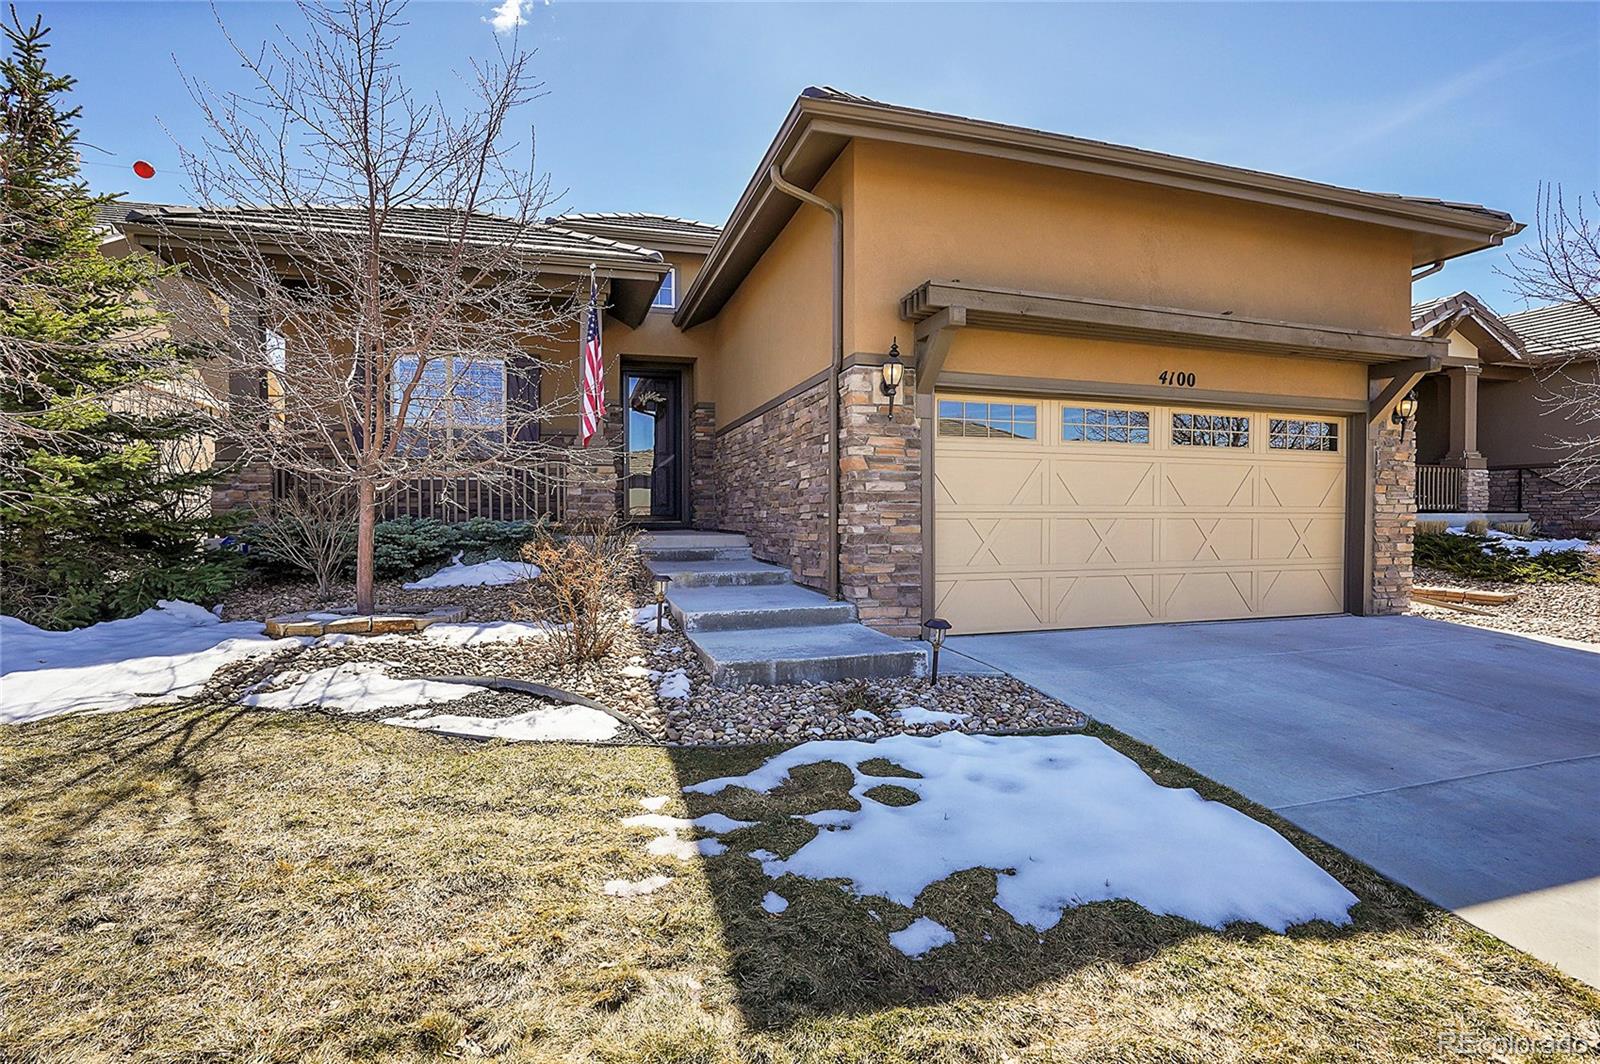 4100  wild horse drive, Broomfield sold home. Closed on 2024-04-22 for $805,000.